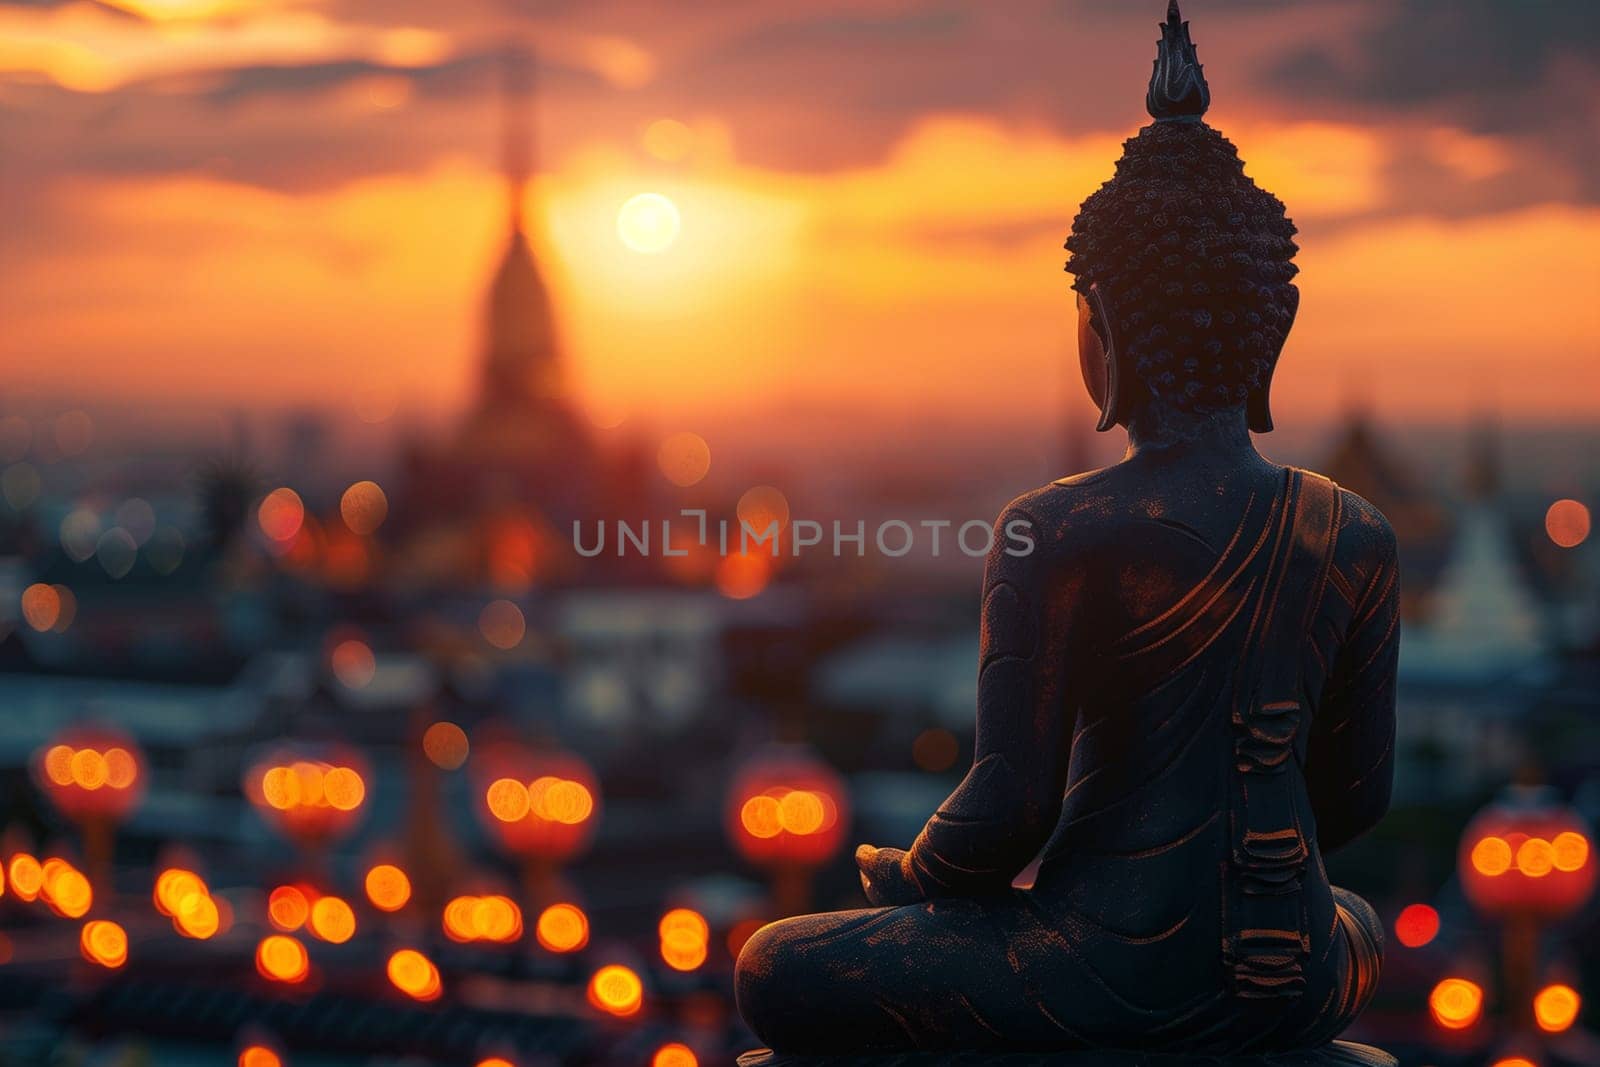 A Buddha statue seated majestically on top of a hill, overlooking the surrounding landscape.